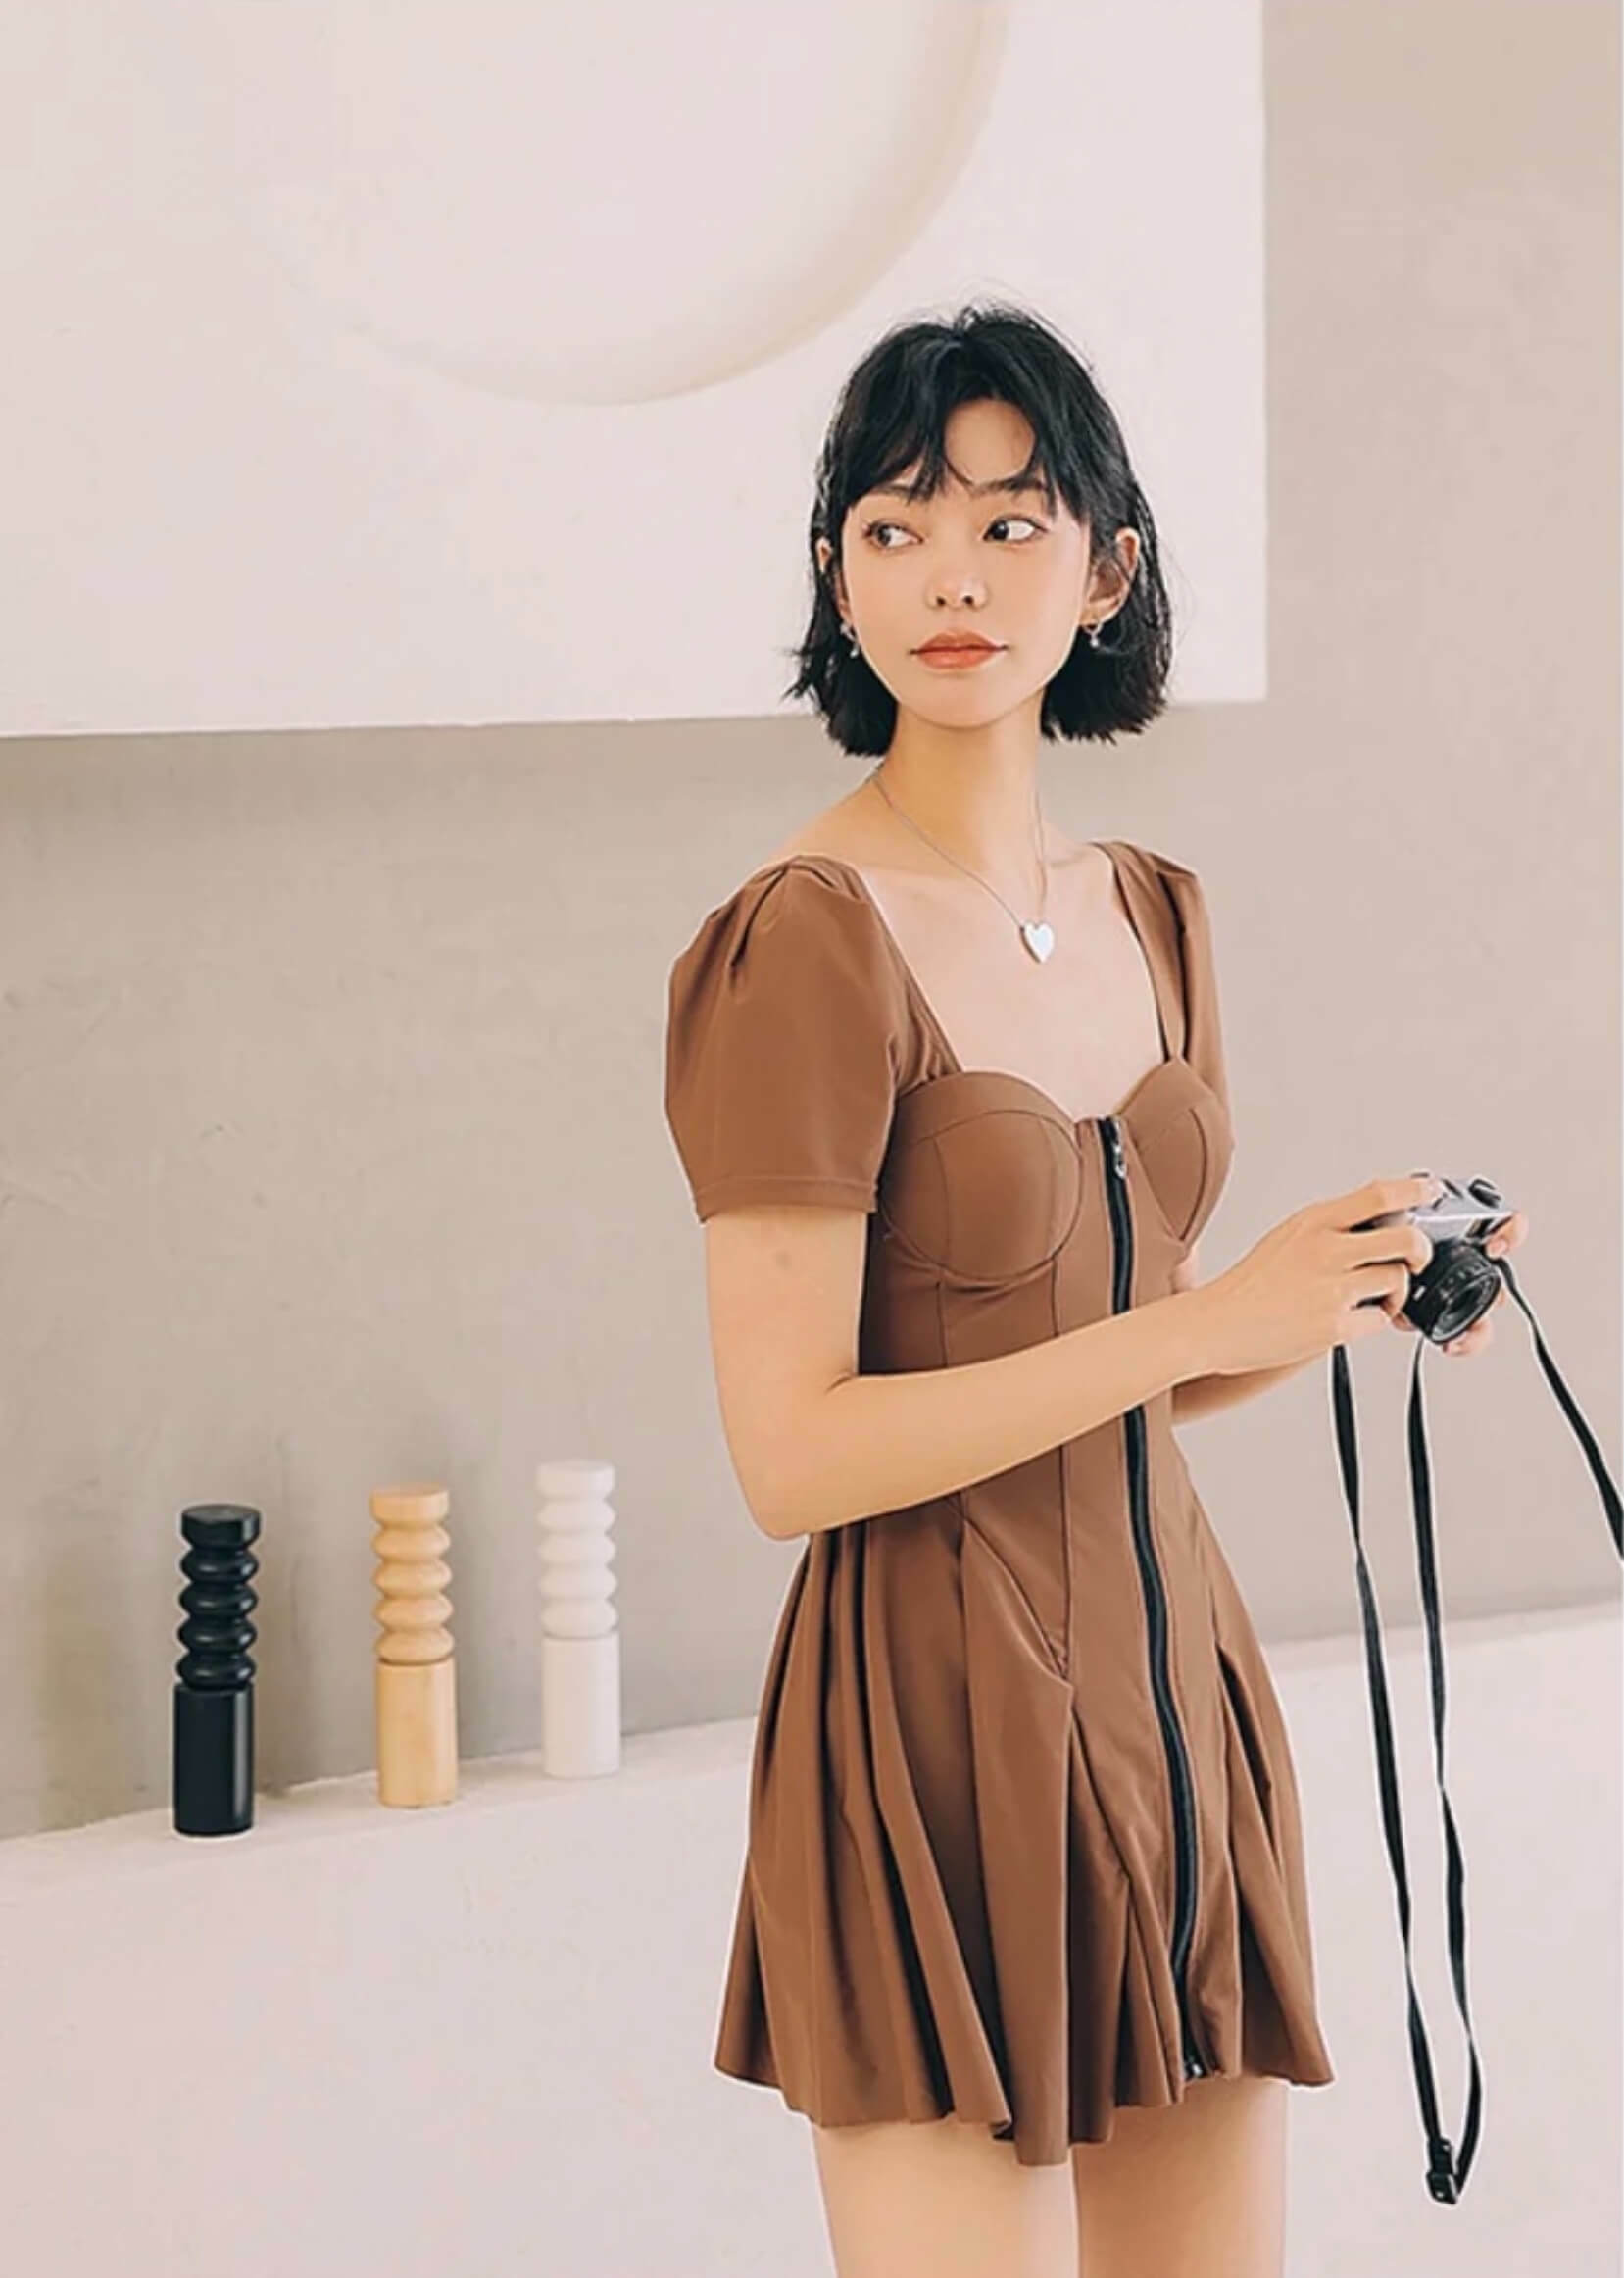 One-Piece Skirt Swimsuit  Women's Small Chest Coverup Looks Thin Squareneck U-neck Solid Swimsuits for woman in khaki brown Hot Spring summer womens plus size skirts beach swimwear dresses Fashion